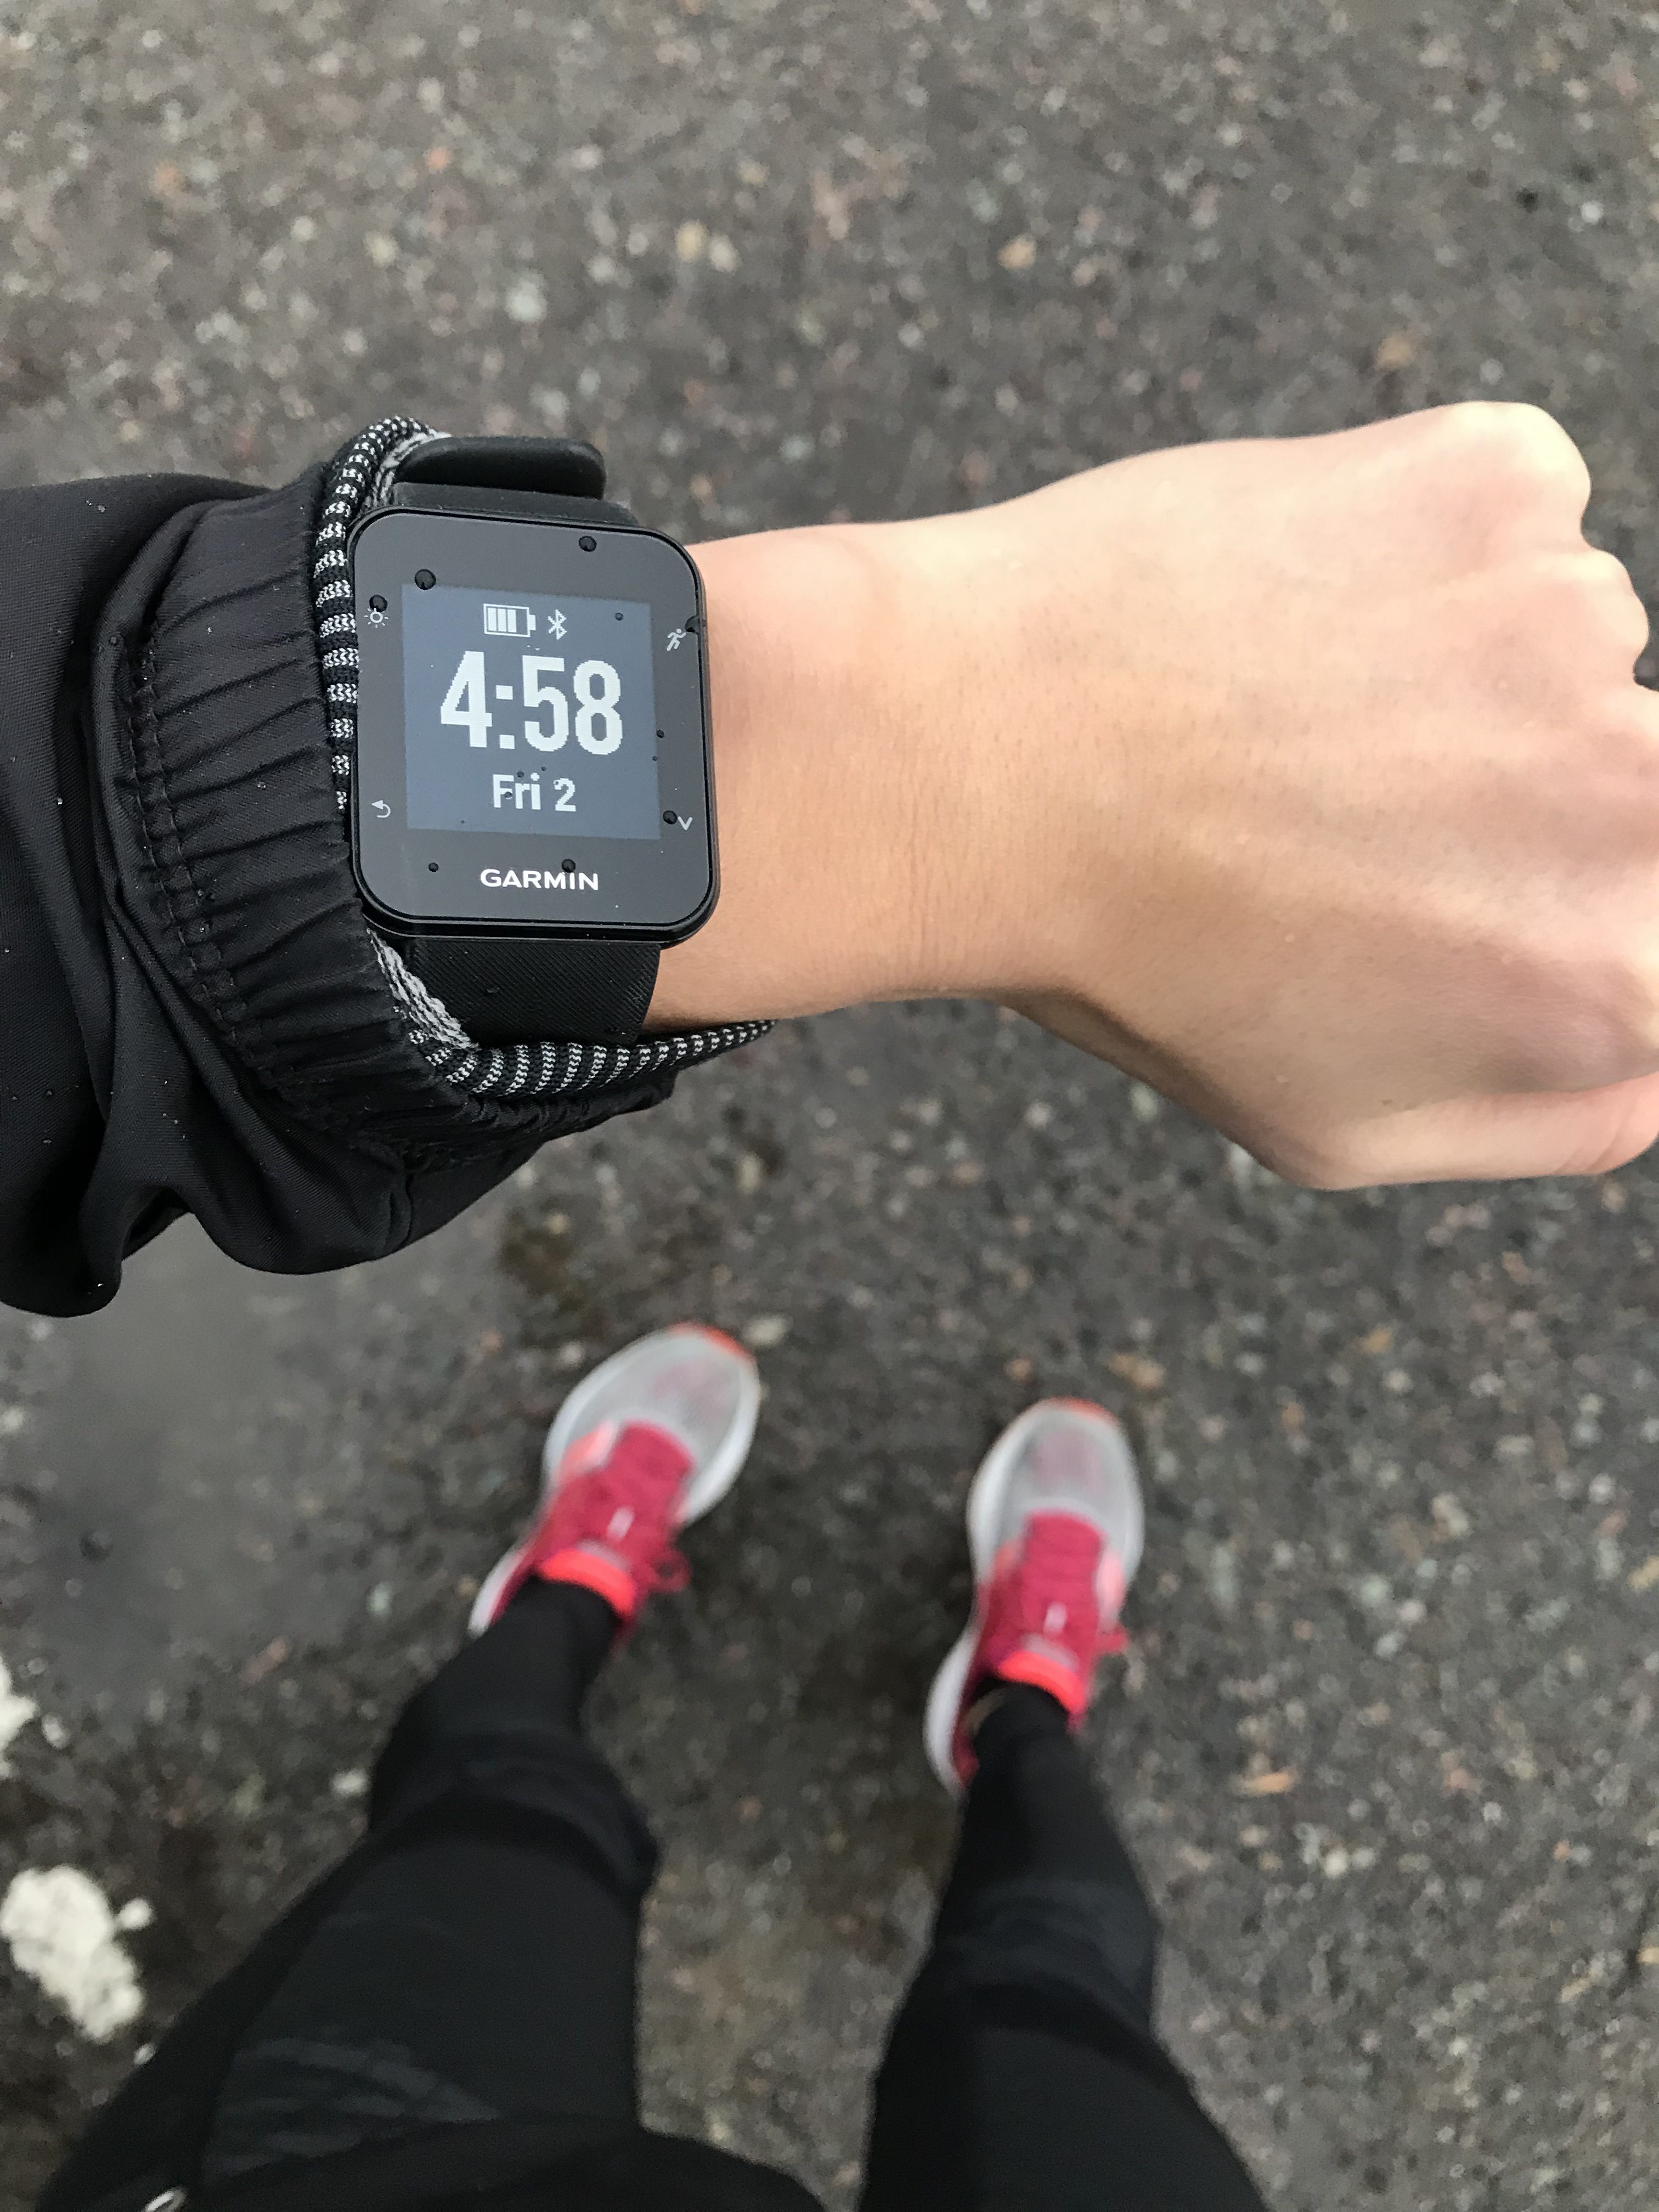 Product Review: Garmin Forerunner - The Runners